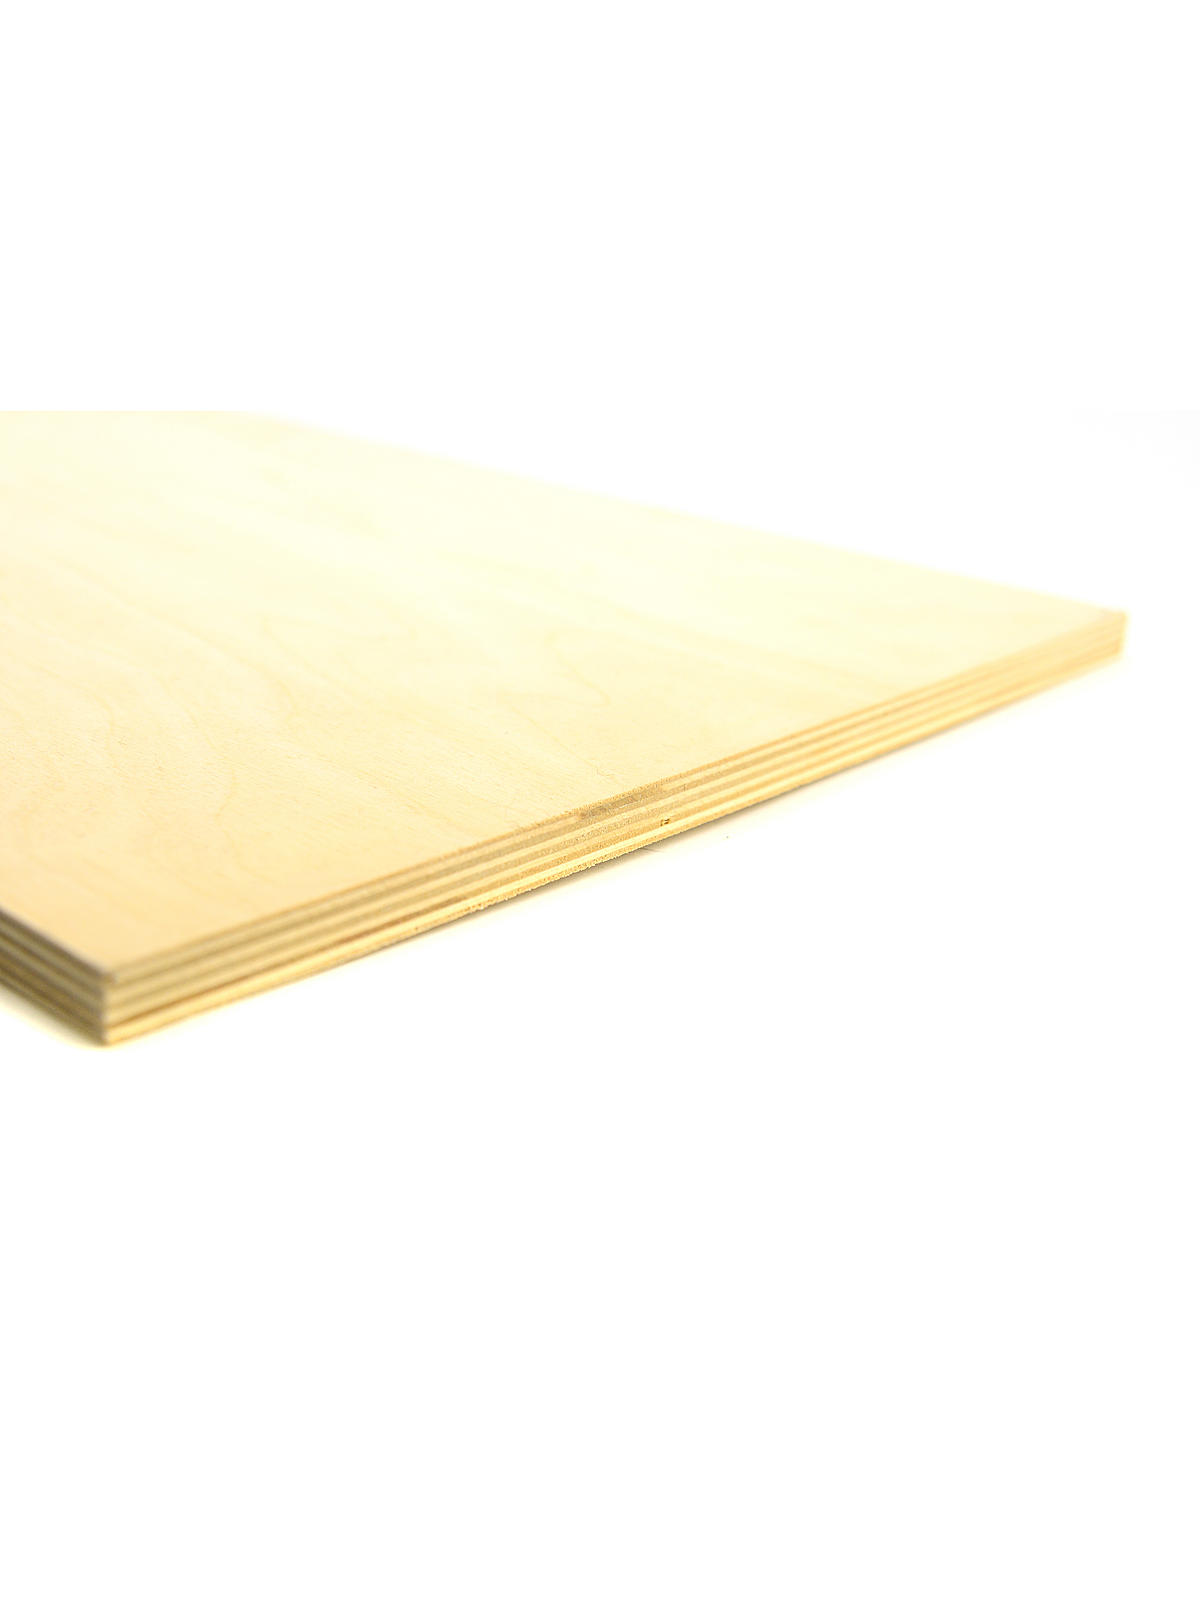 Craft Plywood Sheets 1 2 In. 12 In. X 24 In.